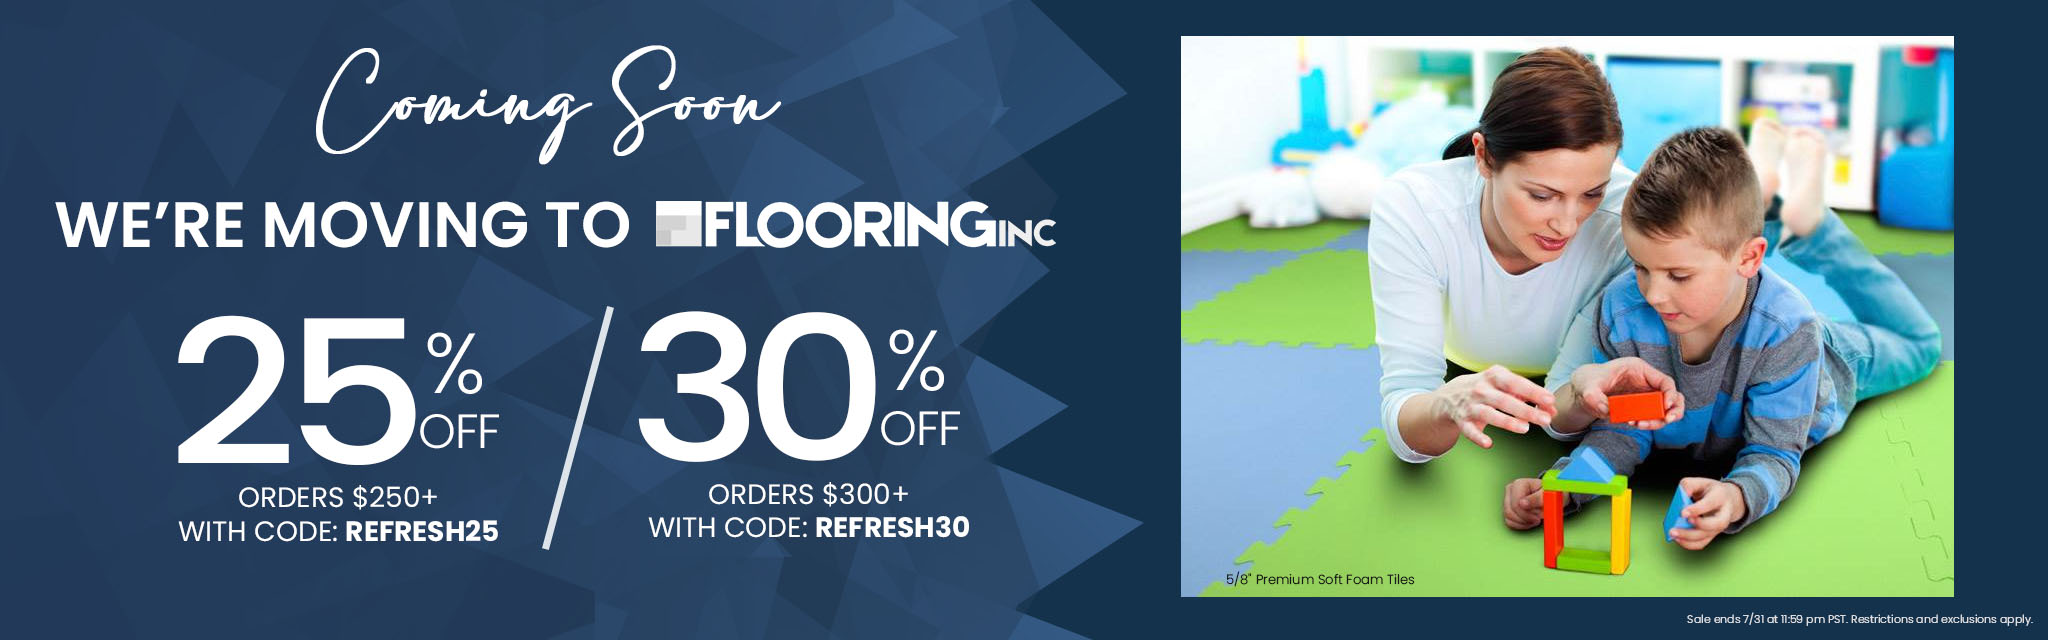 Coming Soon. We're Moving to Flooring Inc. 25% Off Orders $250 or more with code: REFERSH25 or 30% Off Orders $300 or more with code: REFRESH30. Sale ends 7/31 at 11:59pm PST. Restrictions and exclusions apply.